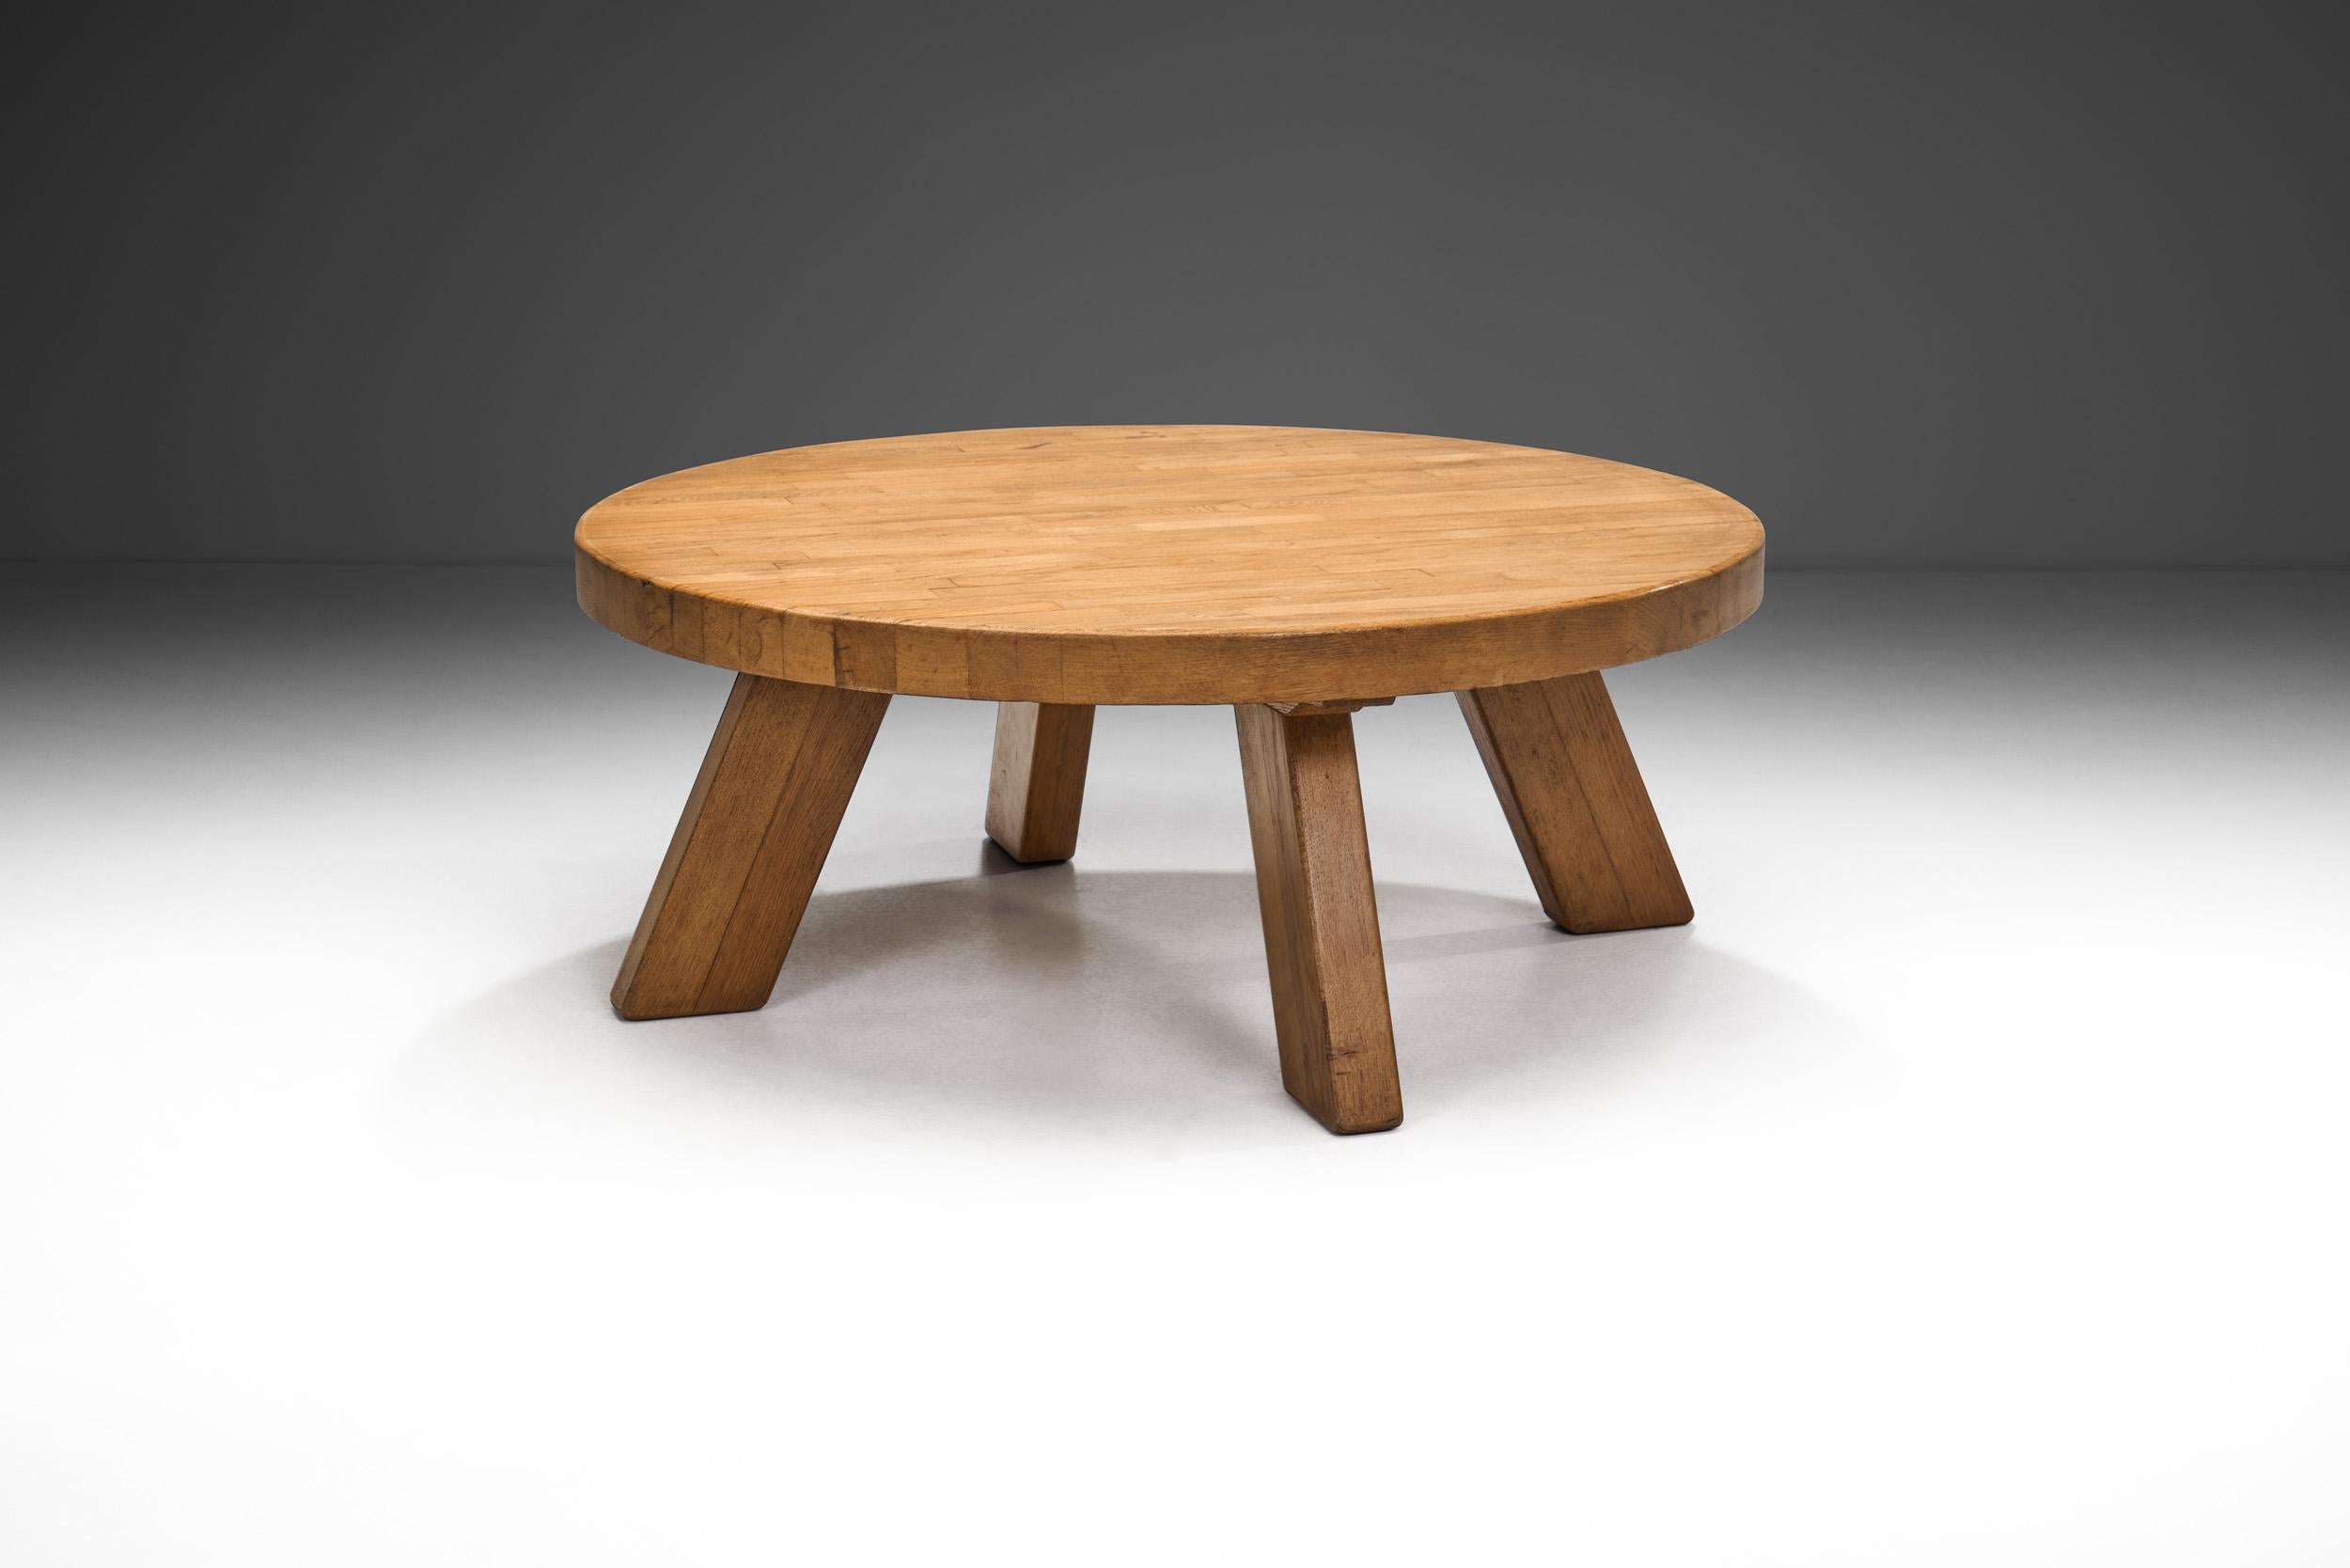 Late 20th Century Solid Oak Round Brutalist Coffee Table, The Netherlands 1970s For Sale